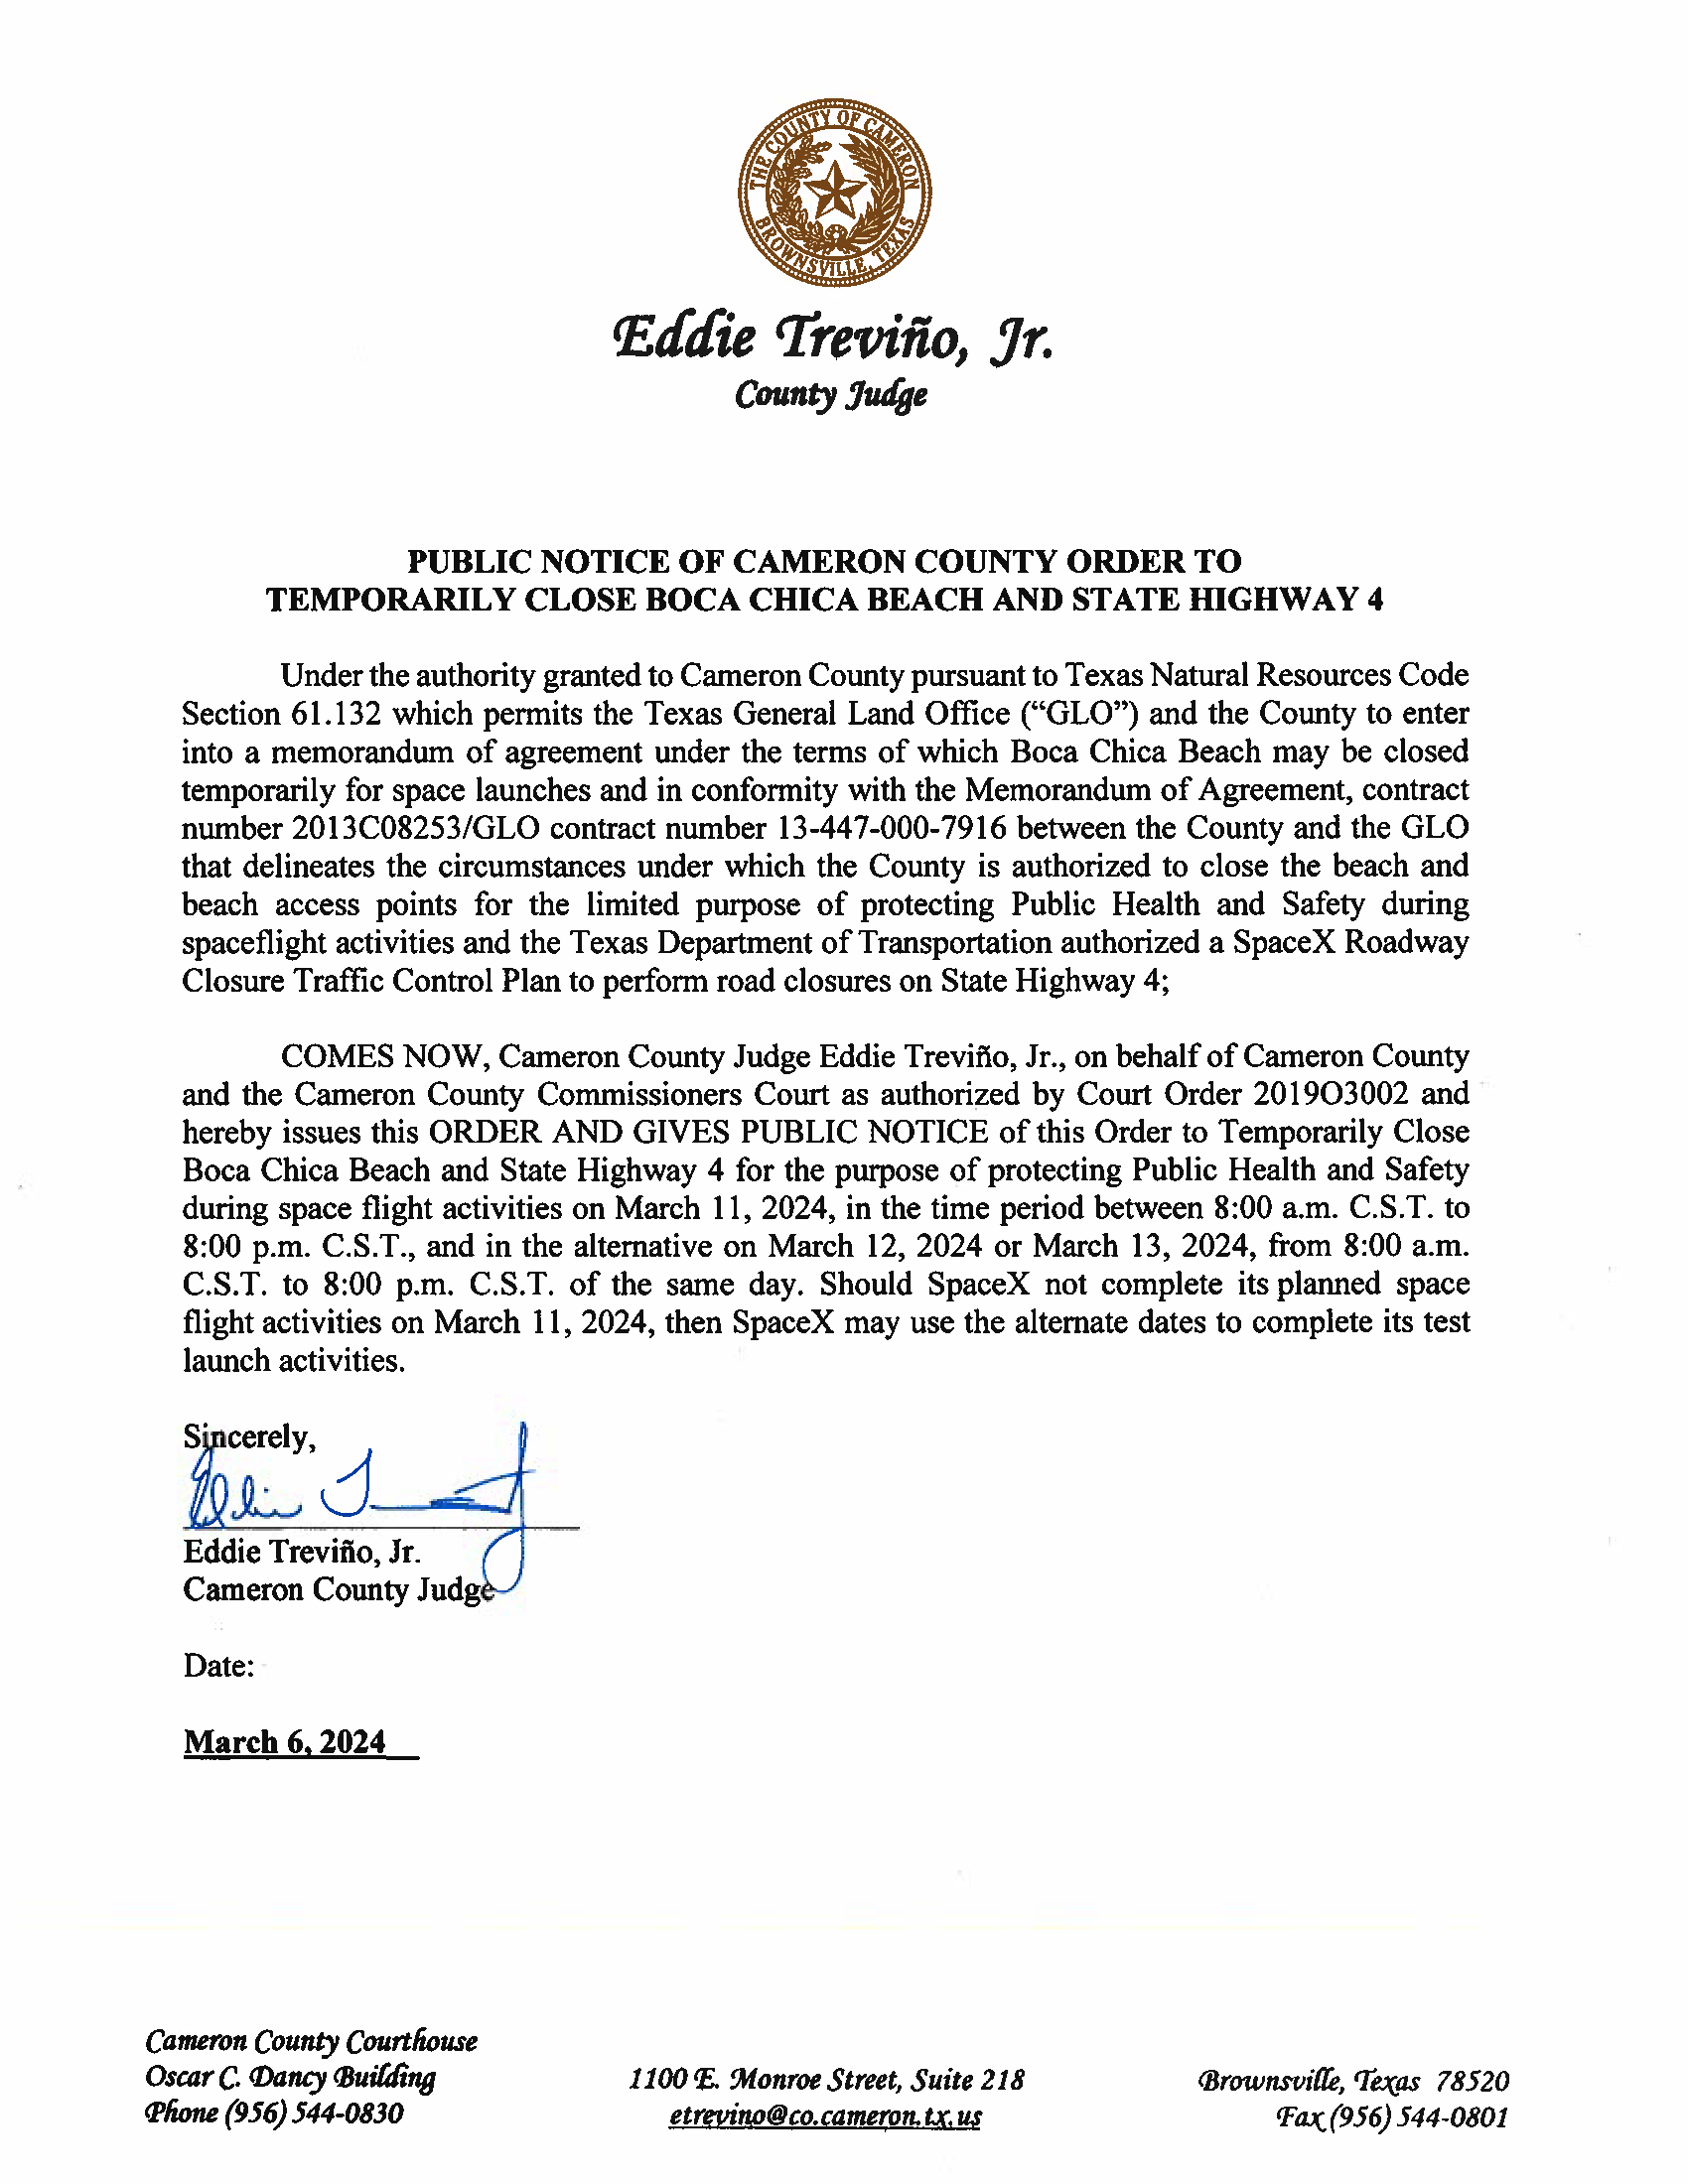 PUBLIC NOTICE OF CAMERON COUNTY ORDER TO TEMP. BEACH CLOSURE AND HWY.03.11.2024